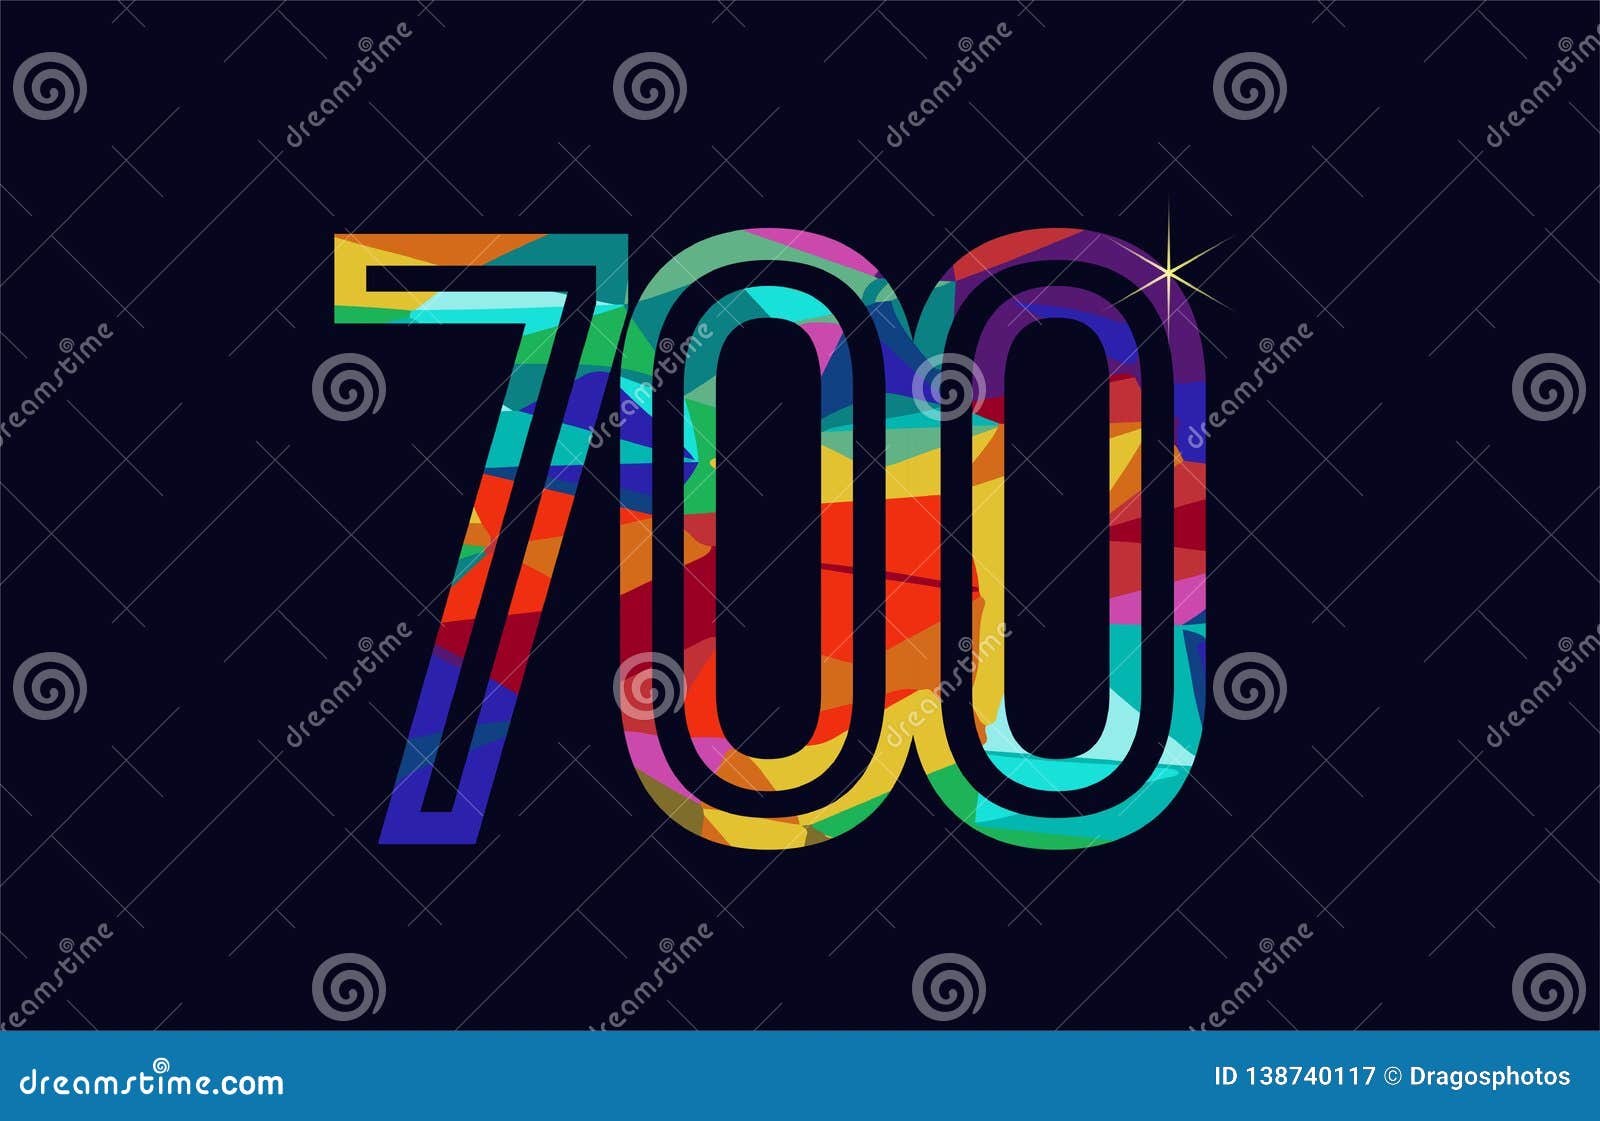 Rainbow Colored Number 700 Logo Company Icon Design Stock Vector ...
